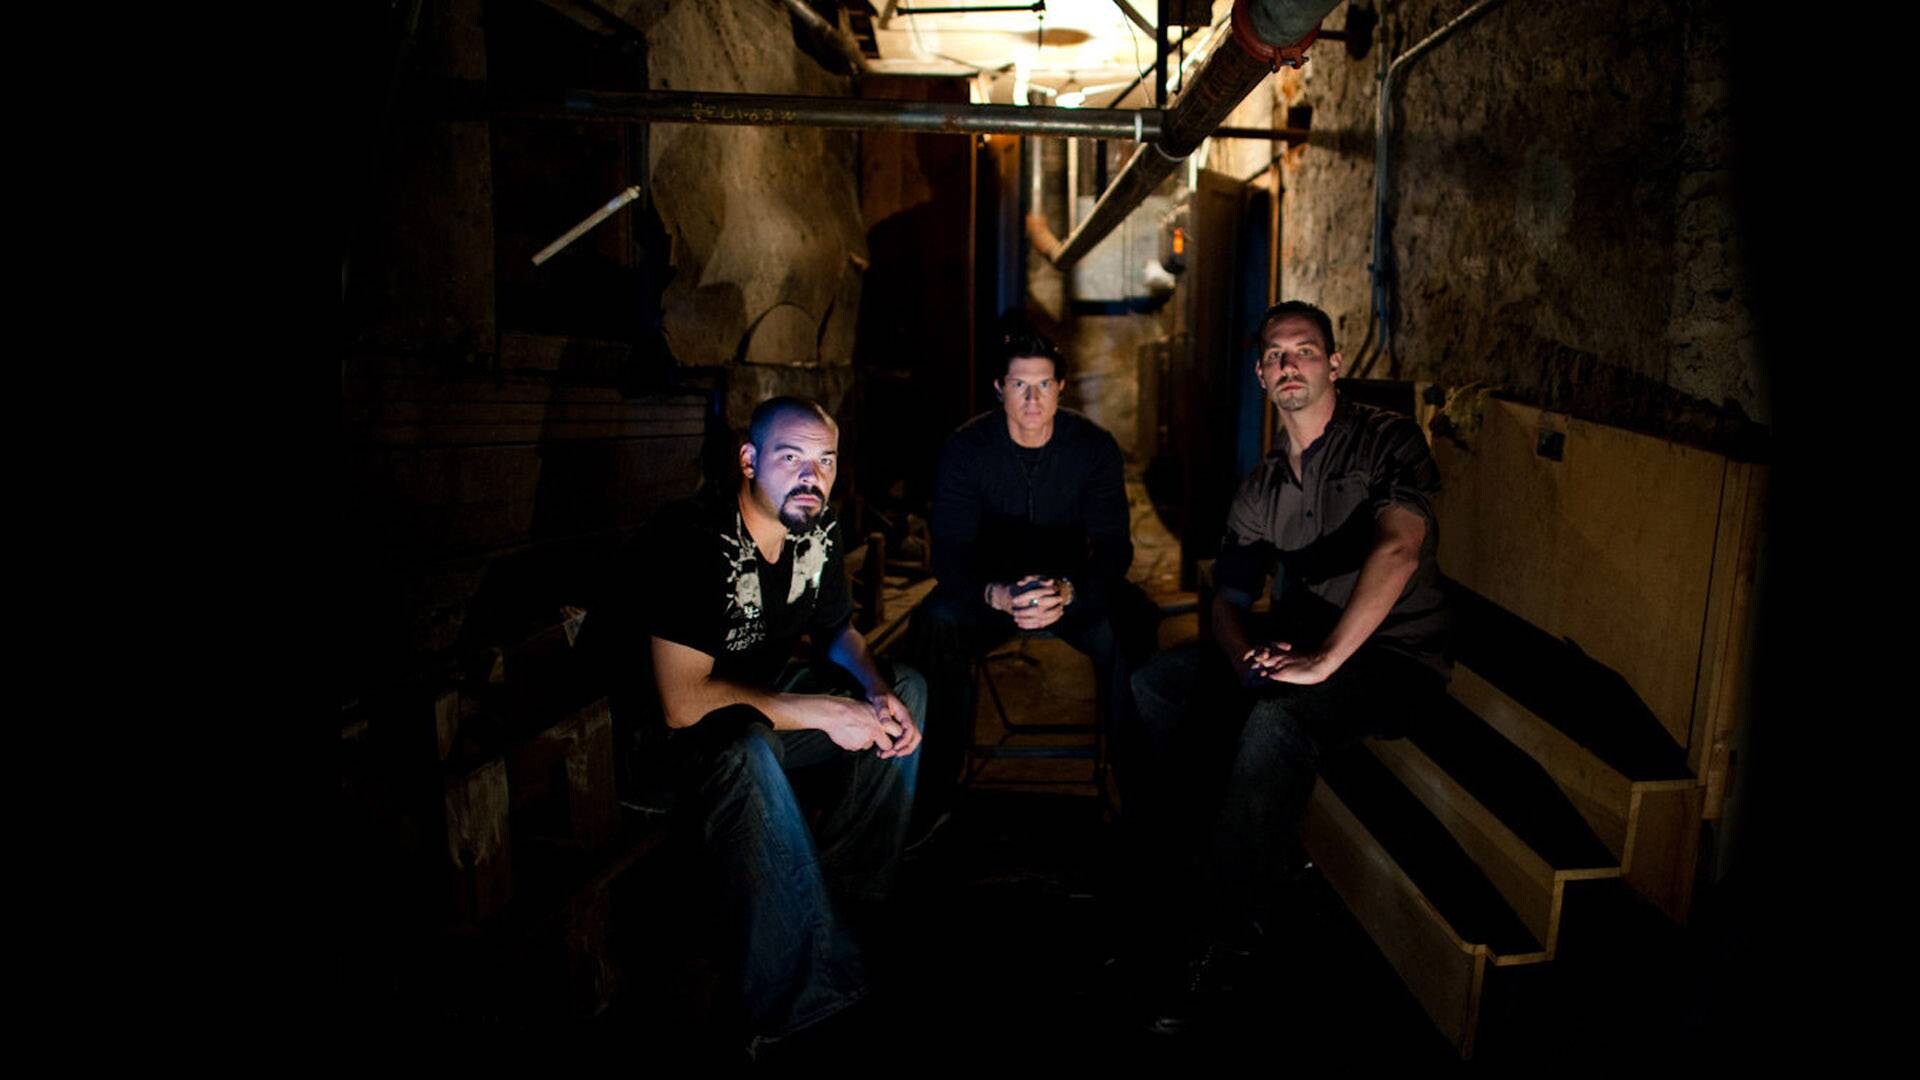 Ghost Adventures (TV Series): Zak Bagans, Billy Tolley, and Jay Wasley, The Prison Band episode, The Yuma Territorial Prison. 1920x1080 Full HD Wallpaper.